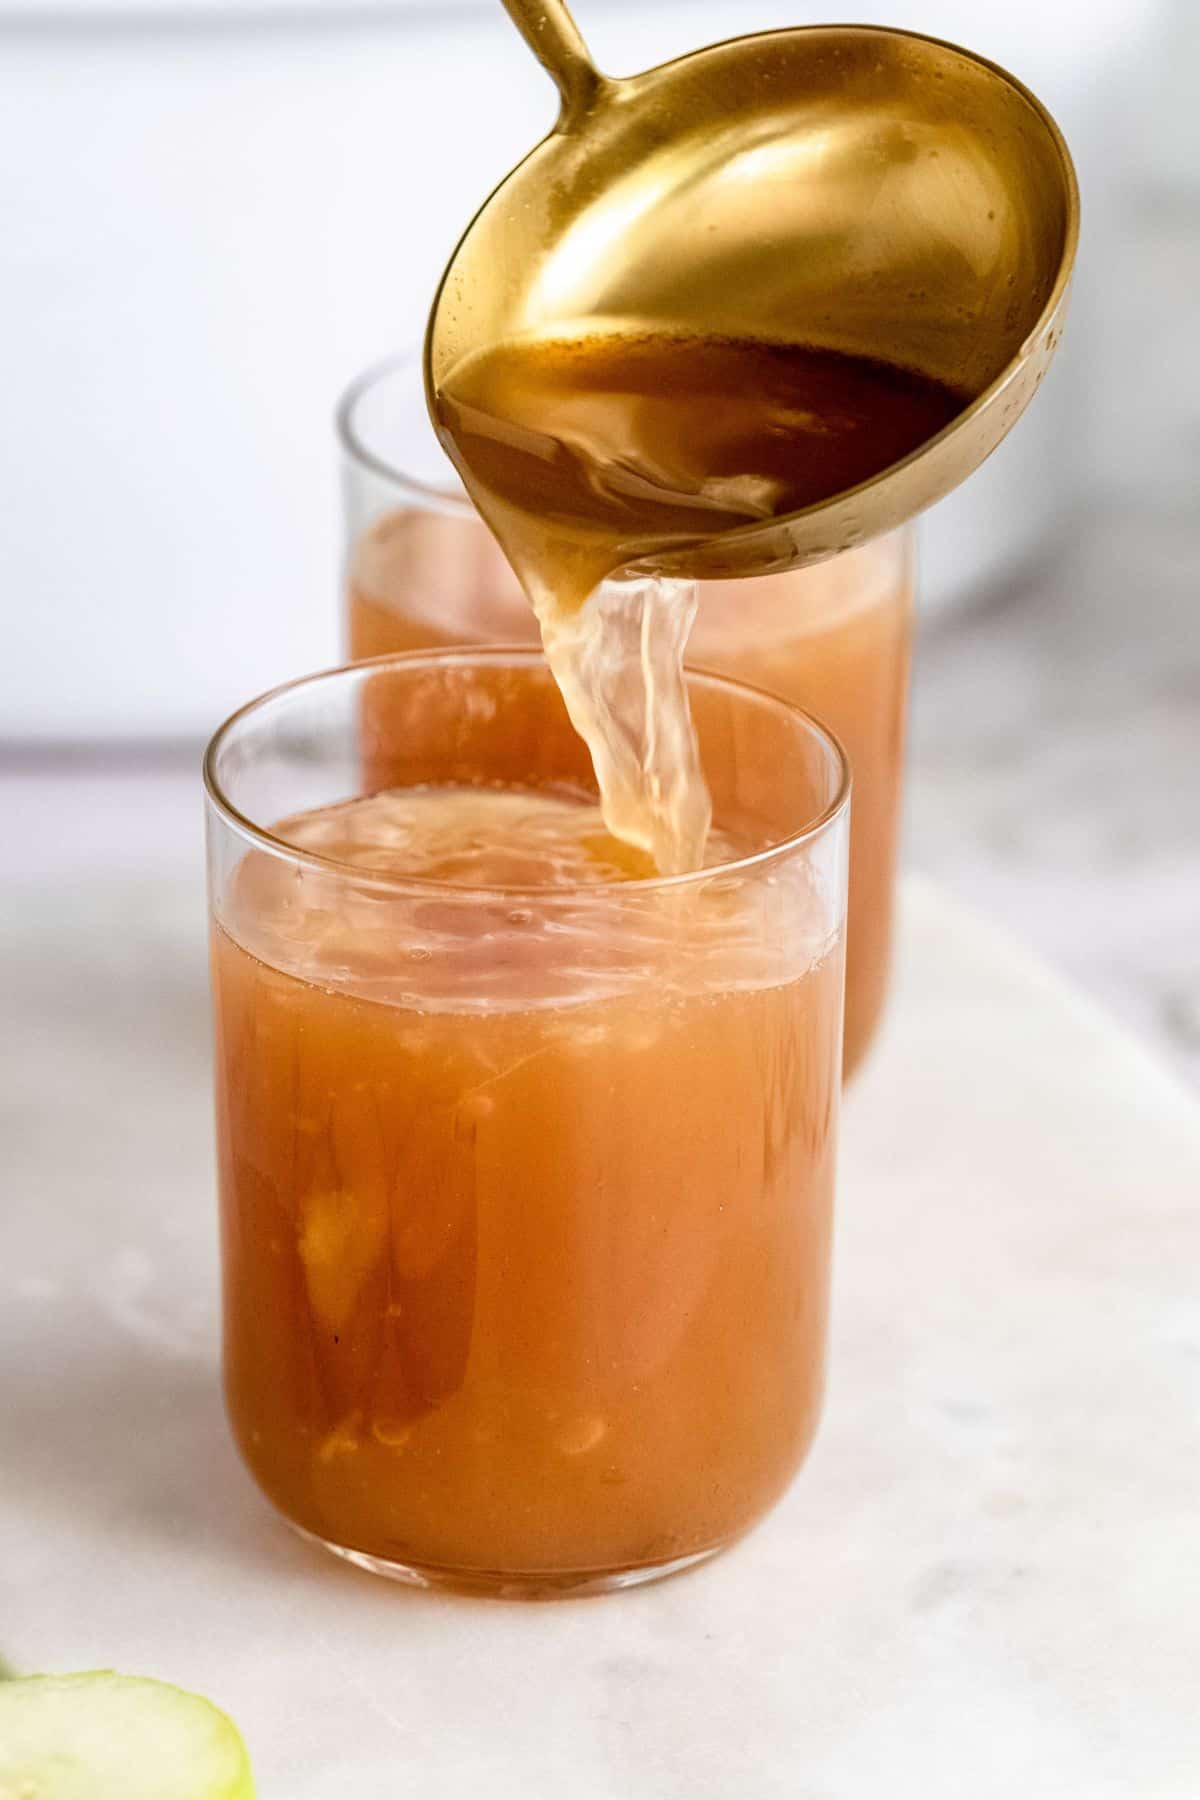 Pouring apple cider in drinking glass.